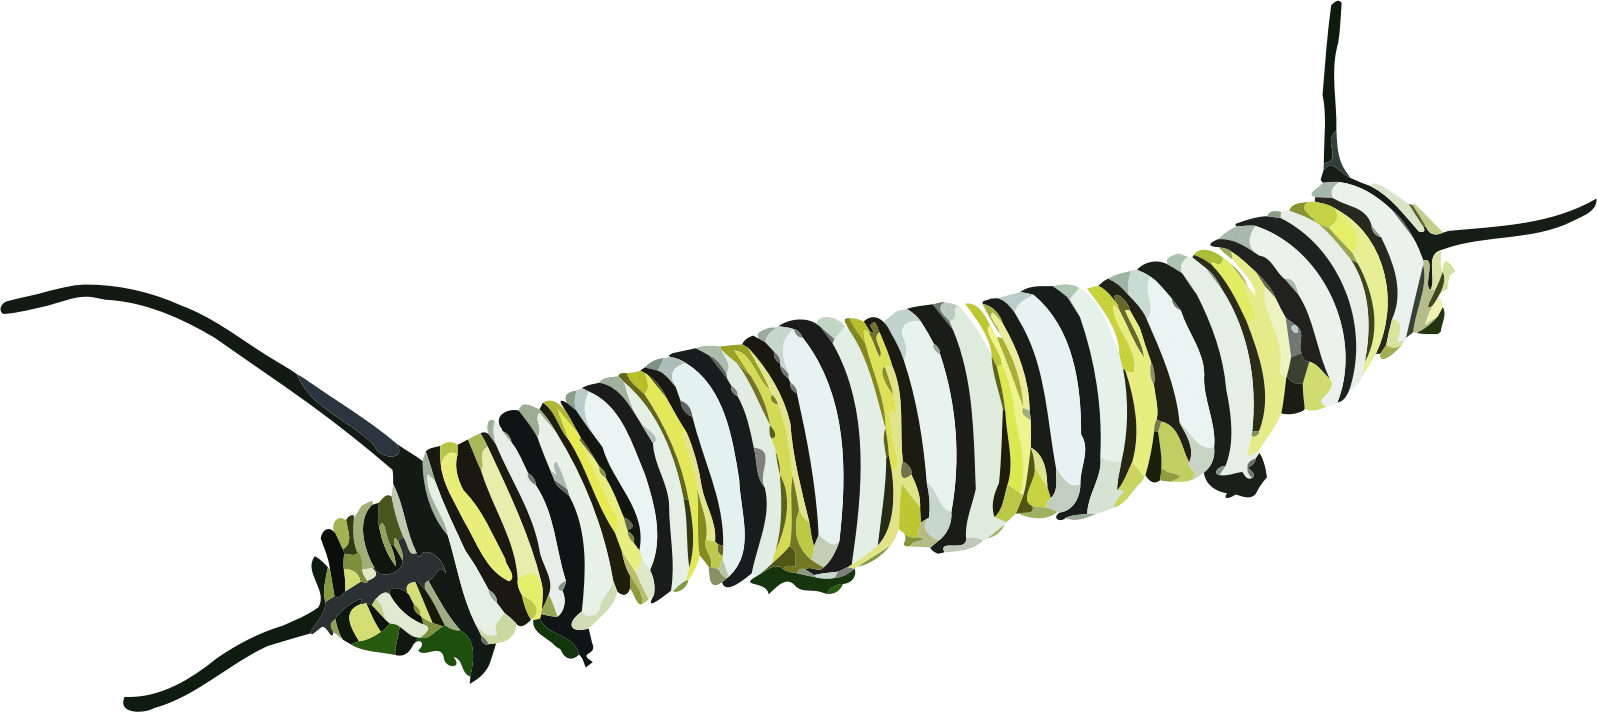 The Very Hungry Caterpillar Clip art